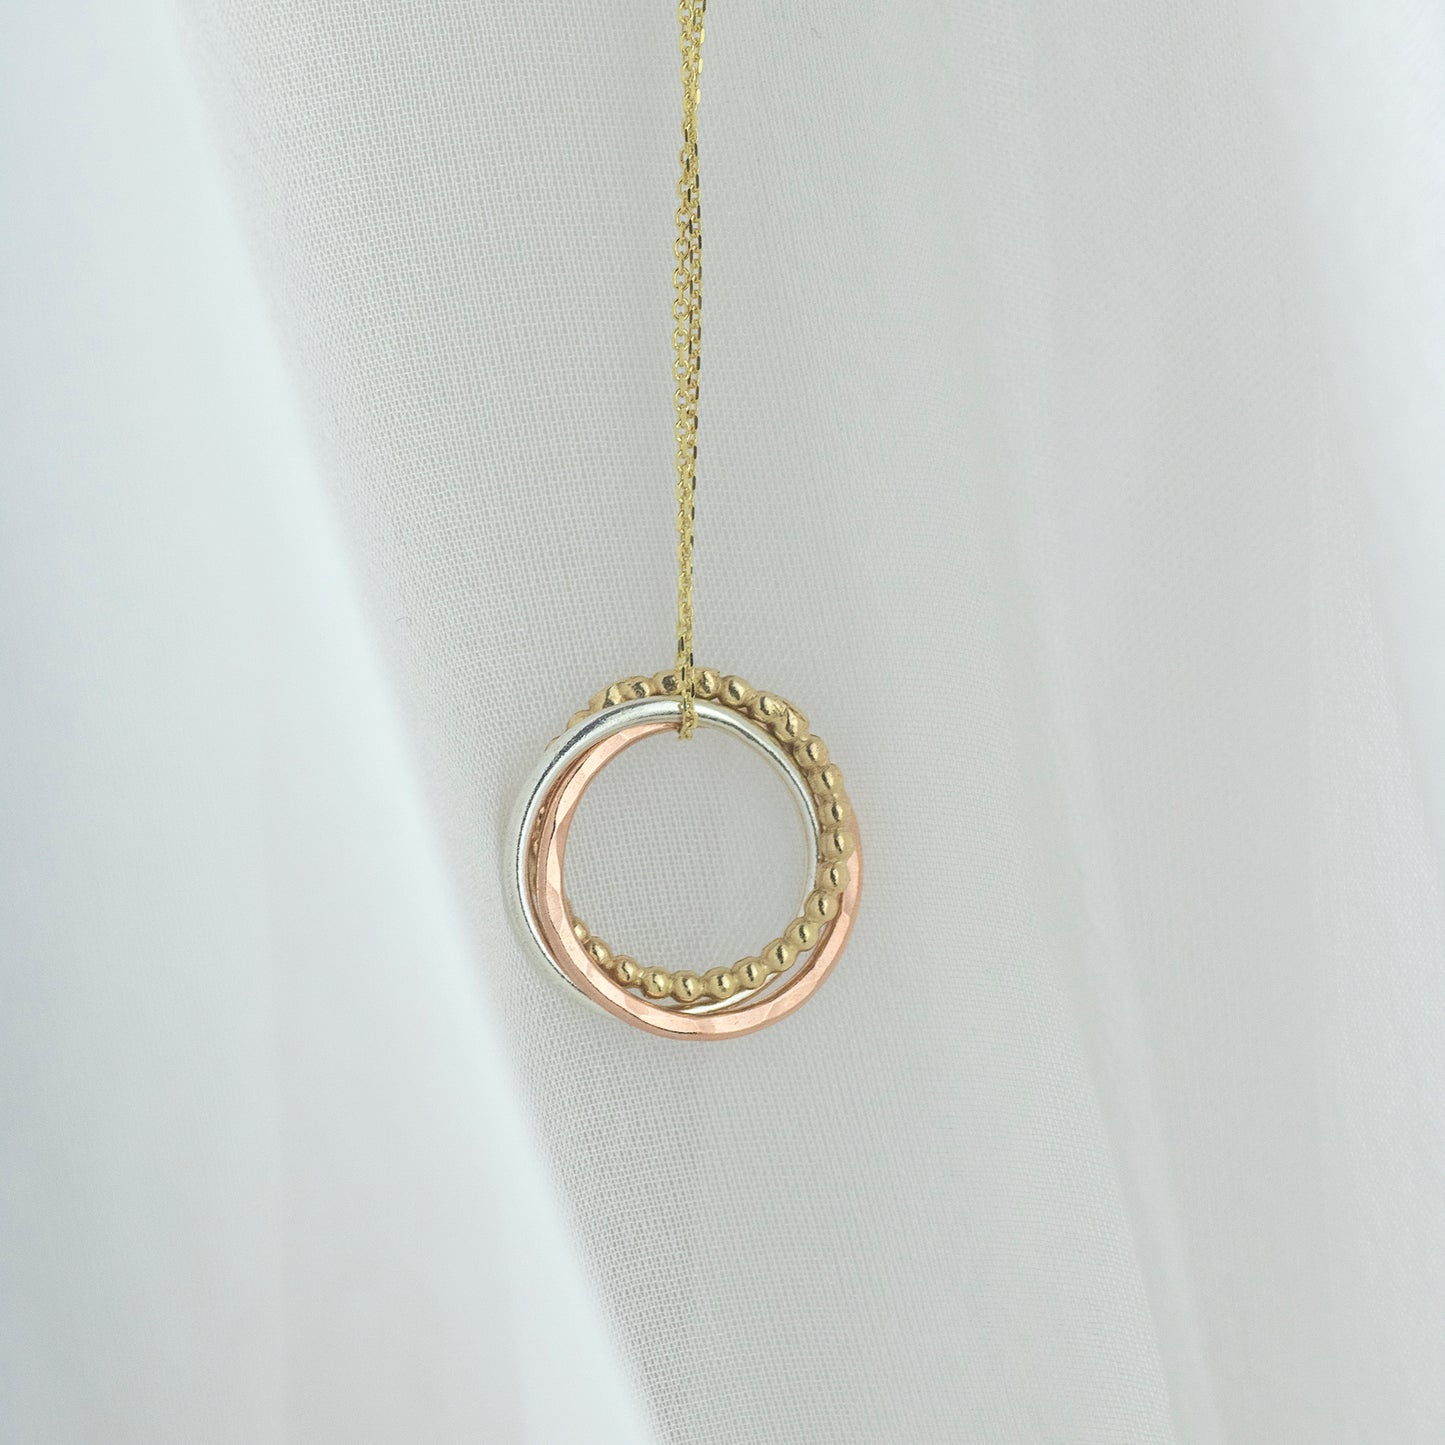 Gift for Mum to Be - 9kt Gold Necklace - 3 Links for 3 Loved ones